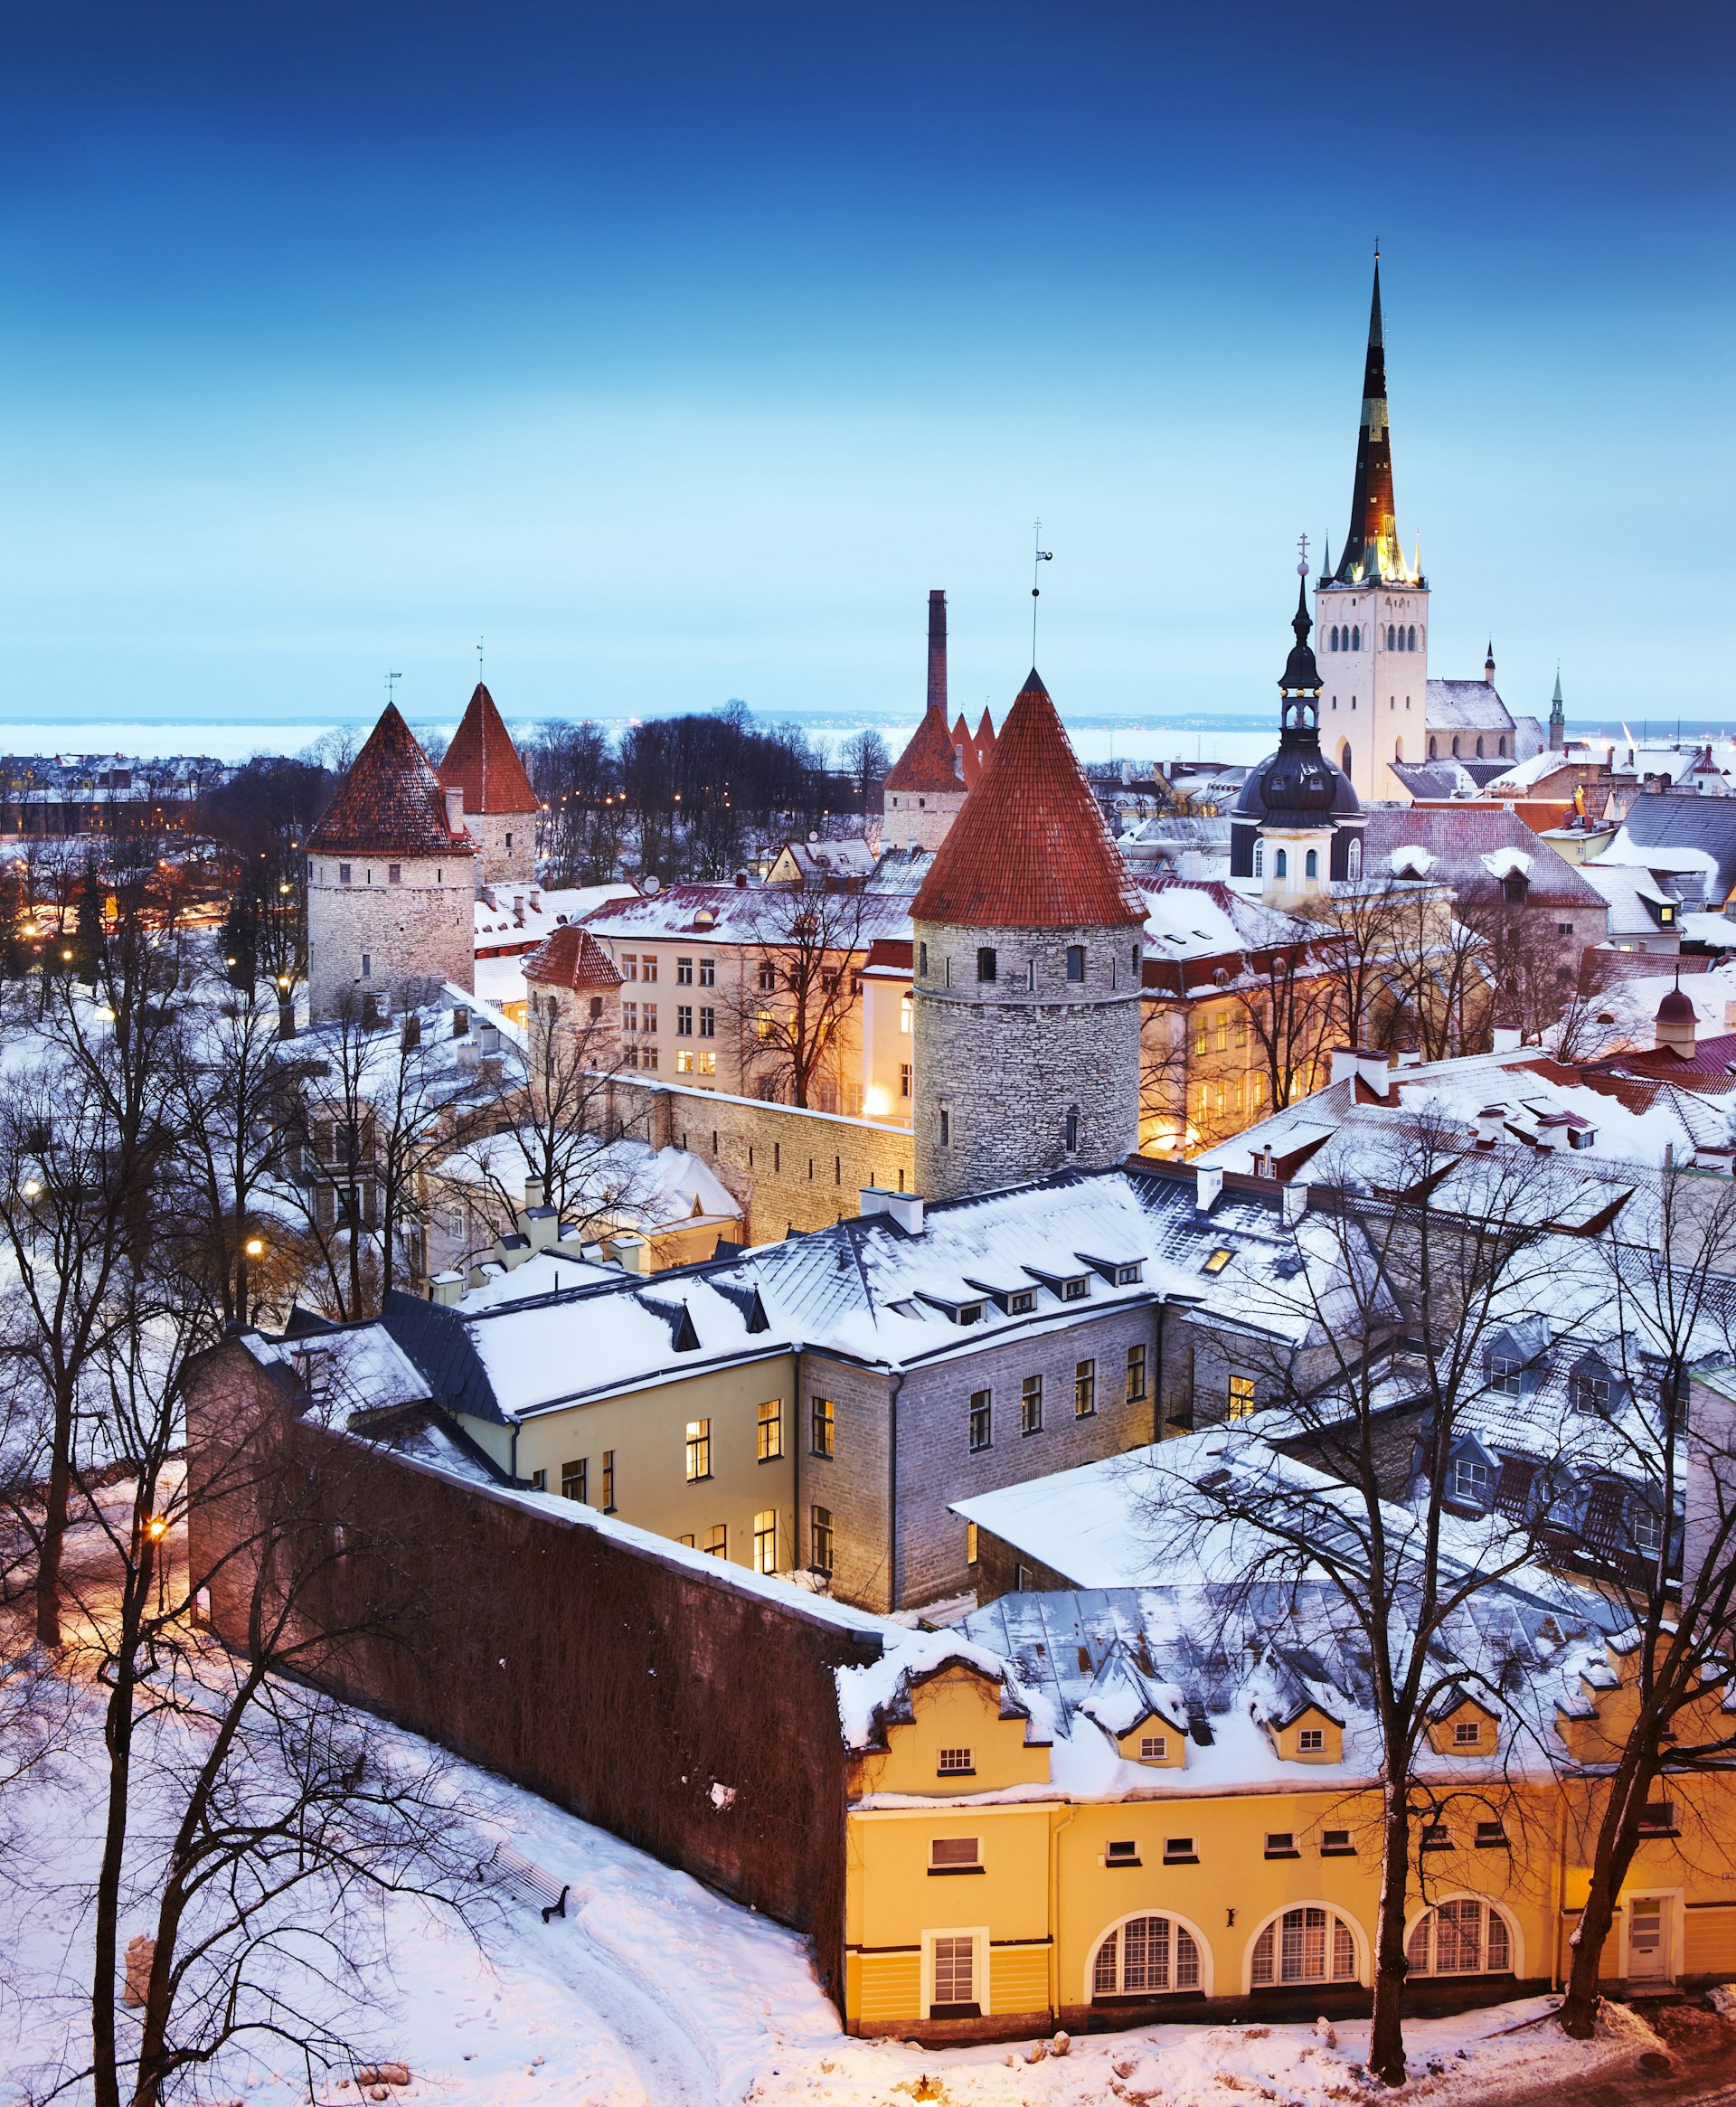 Snow dusting on rooftops of the Old Town in Tallinn. 